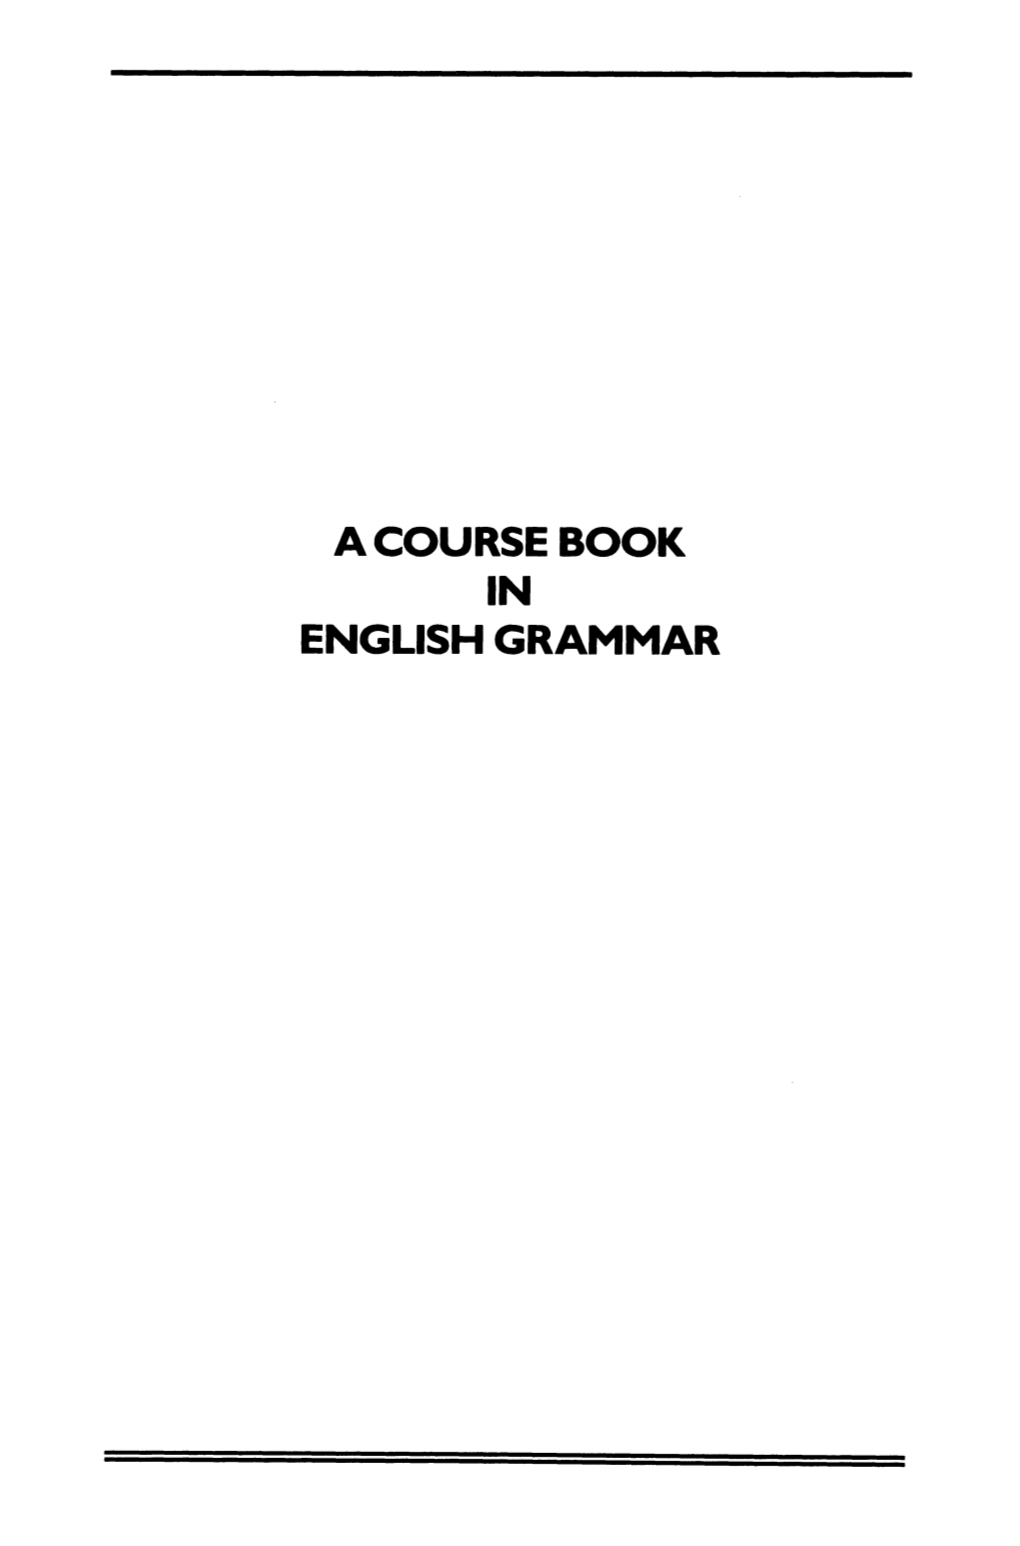 A COURSE BOOK in ENGLISH GRAMMAR Titles in the Studies in English Language Series